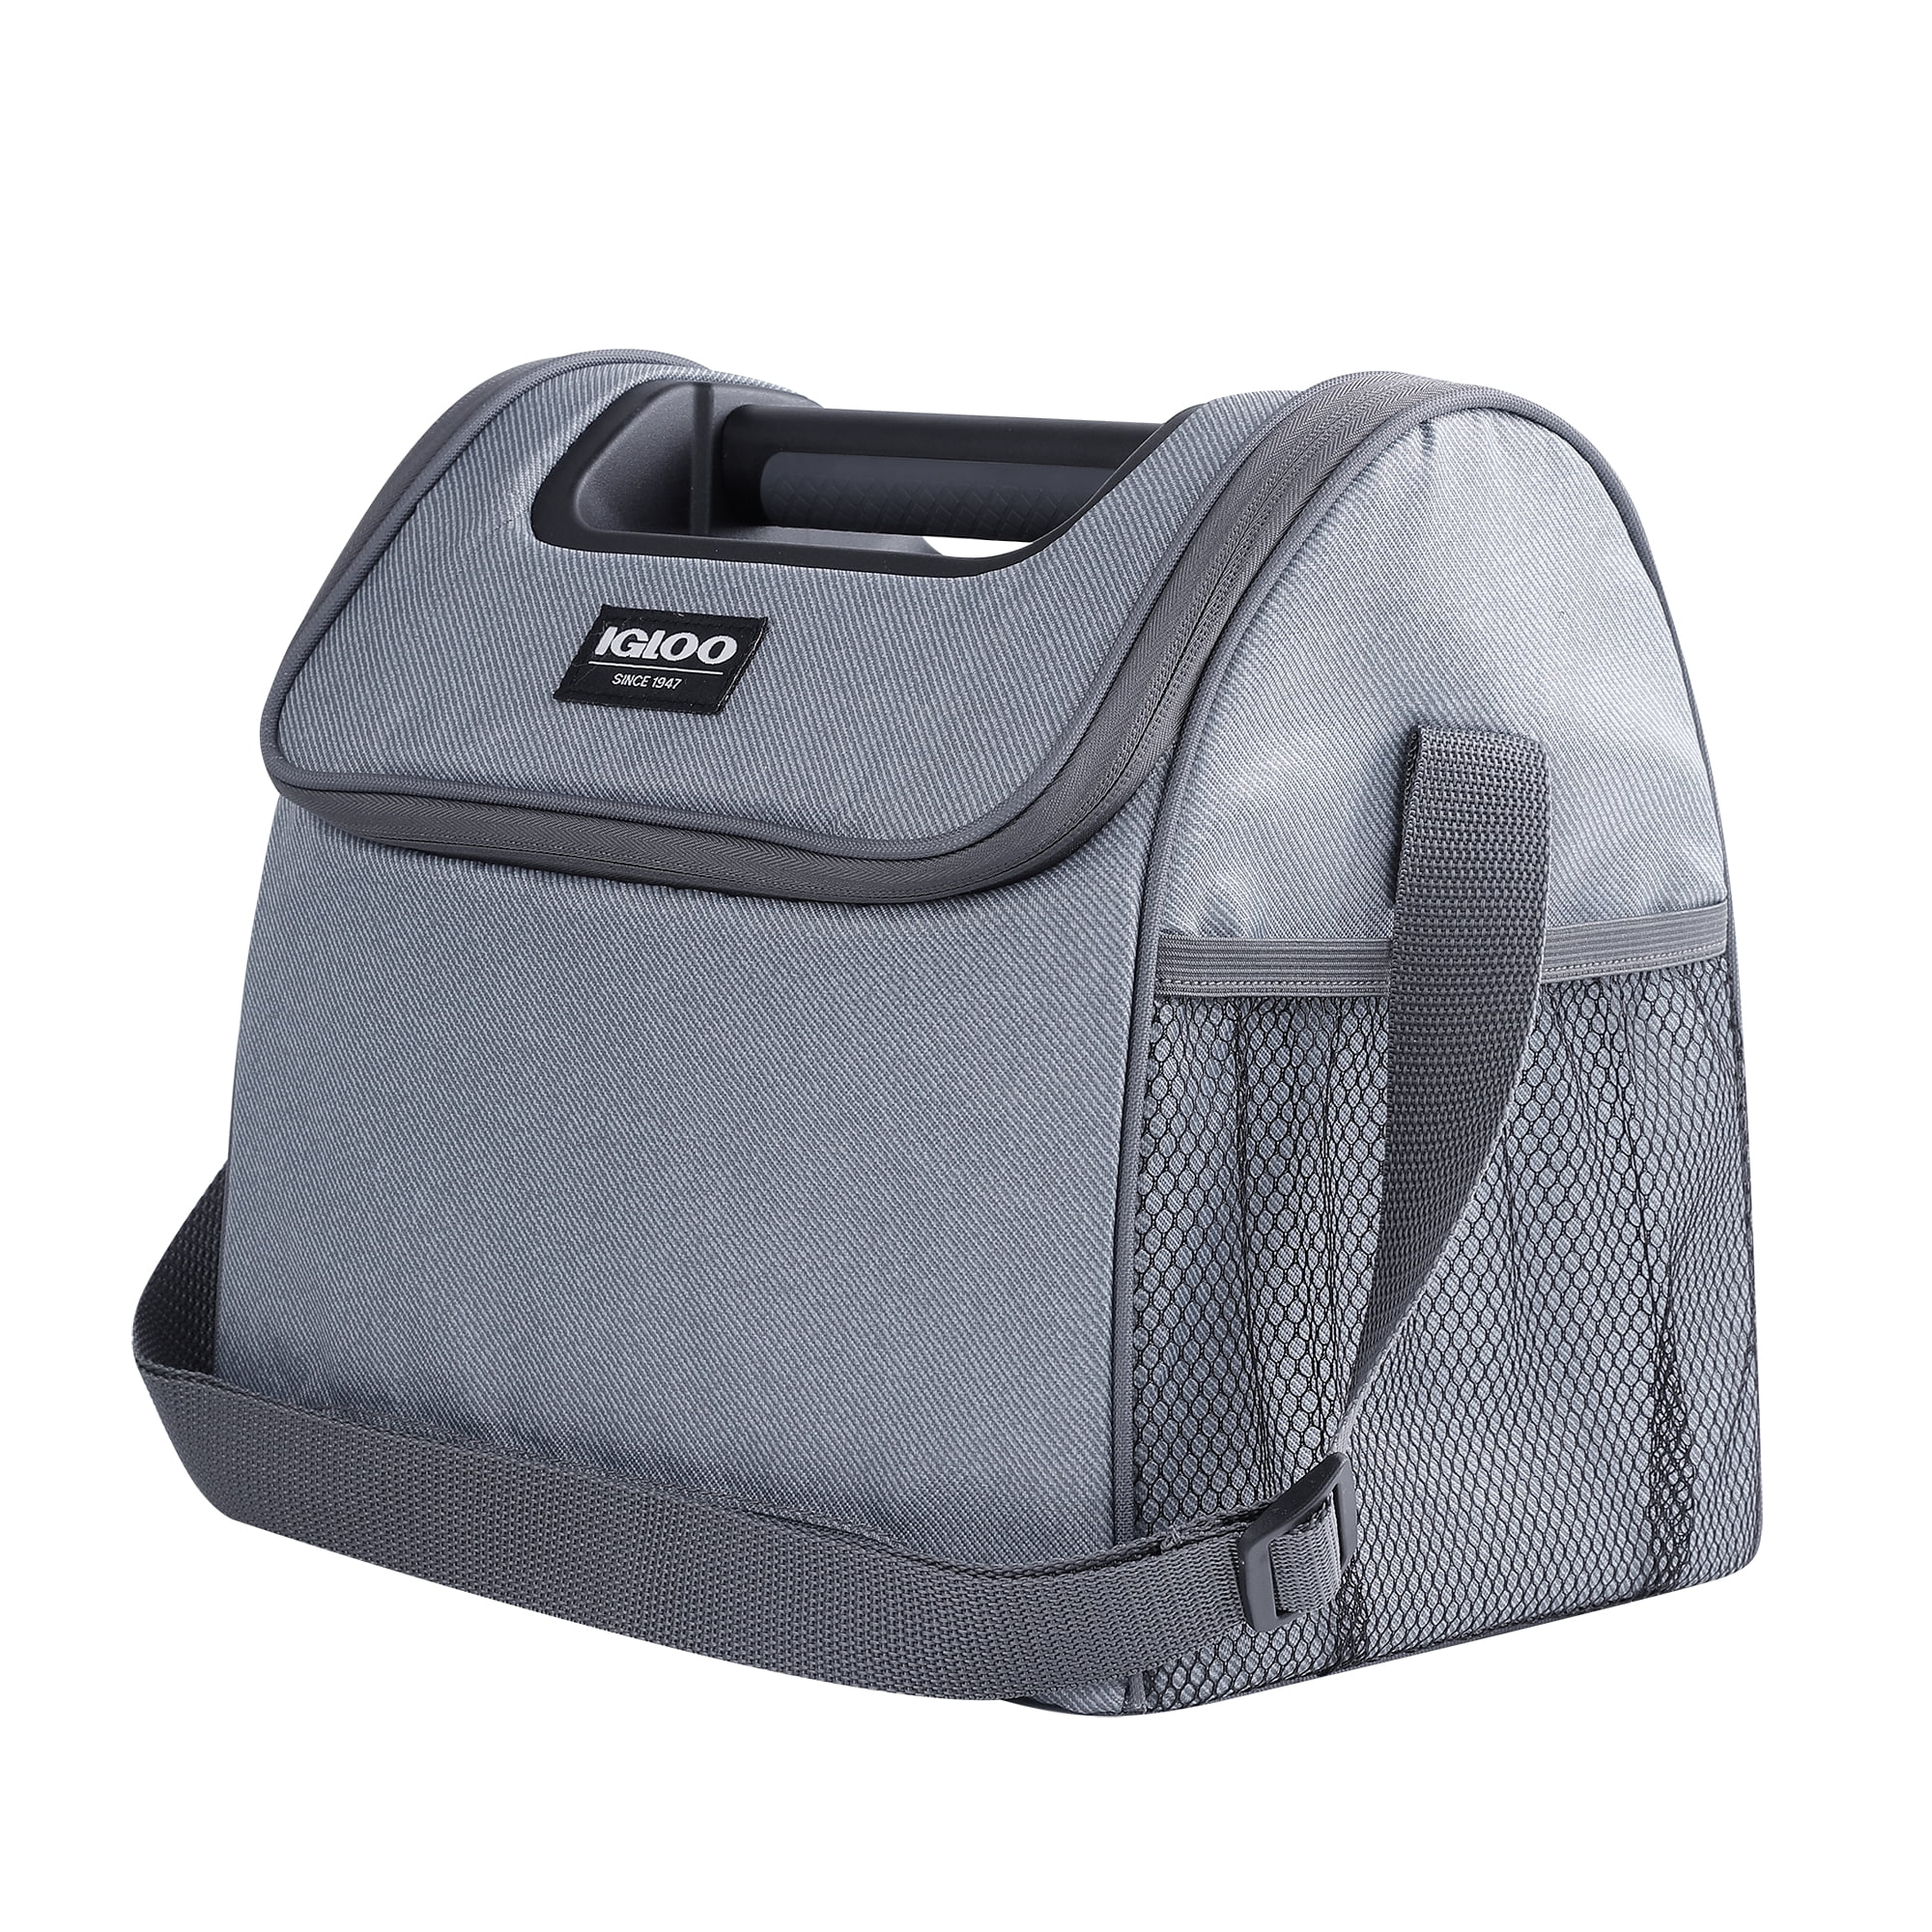 Igloo 24 cans Laguna Backpack Soft Sided Cooler, Gray Twill with Ibiza Blue